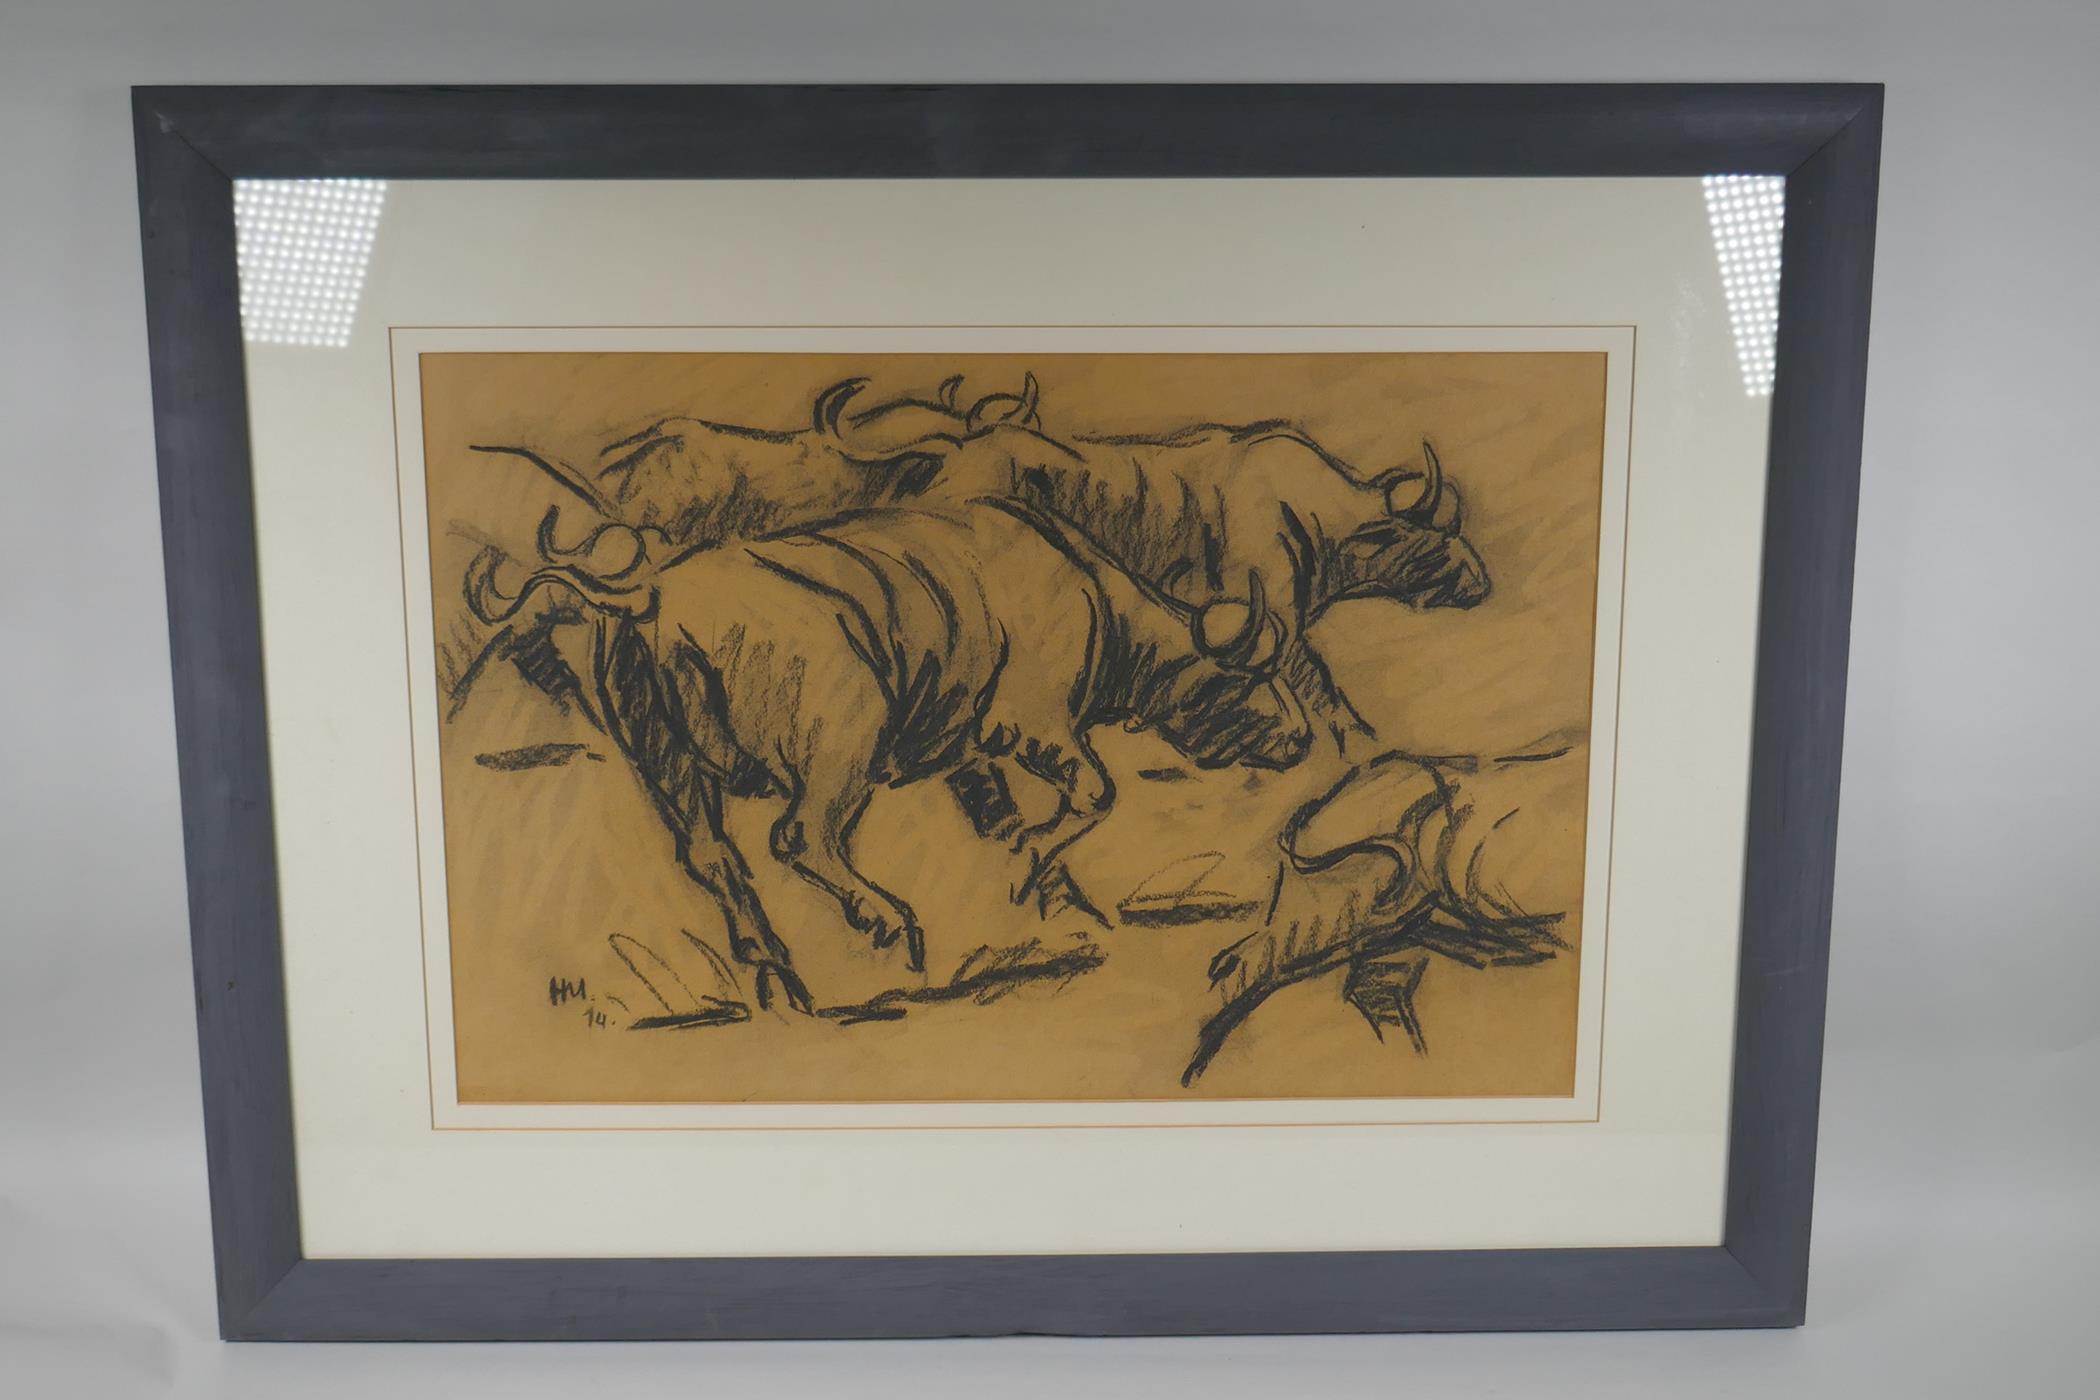 Bulls stampeding, monogrammed charcoal drawing, 37 x 56cm - Image 2 of 3